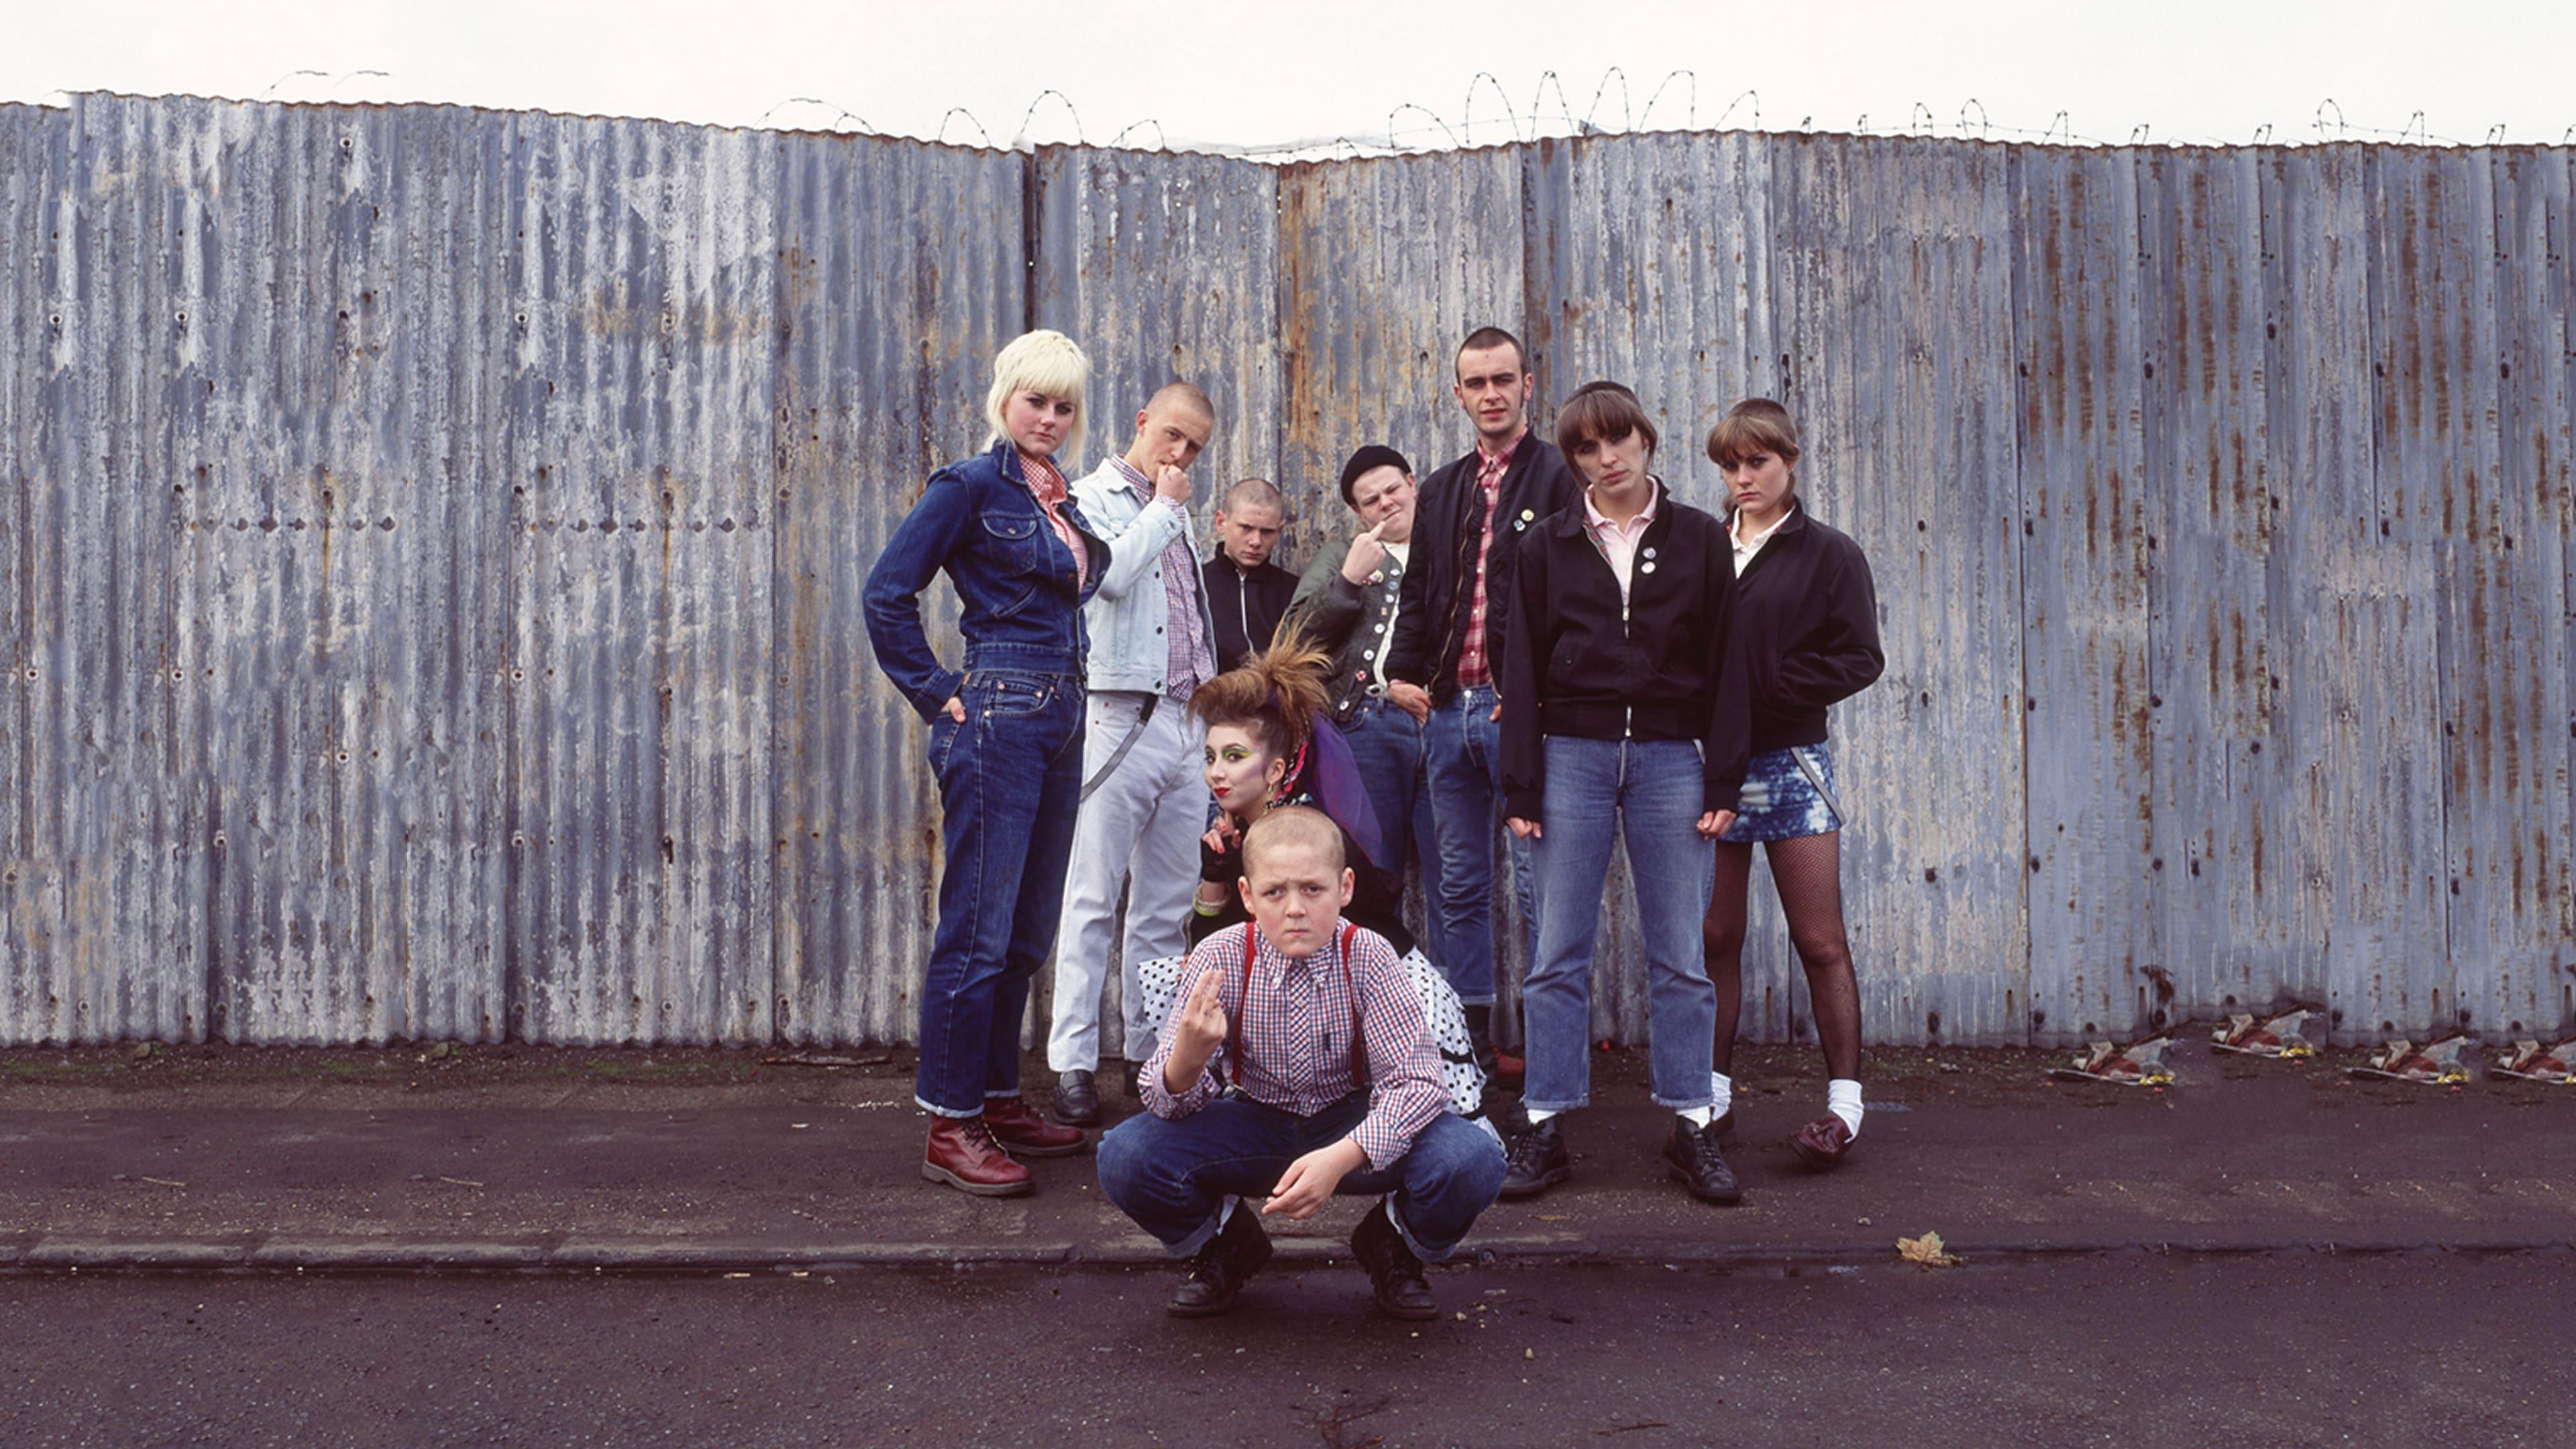 This Is England backdrop